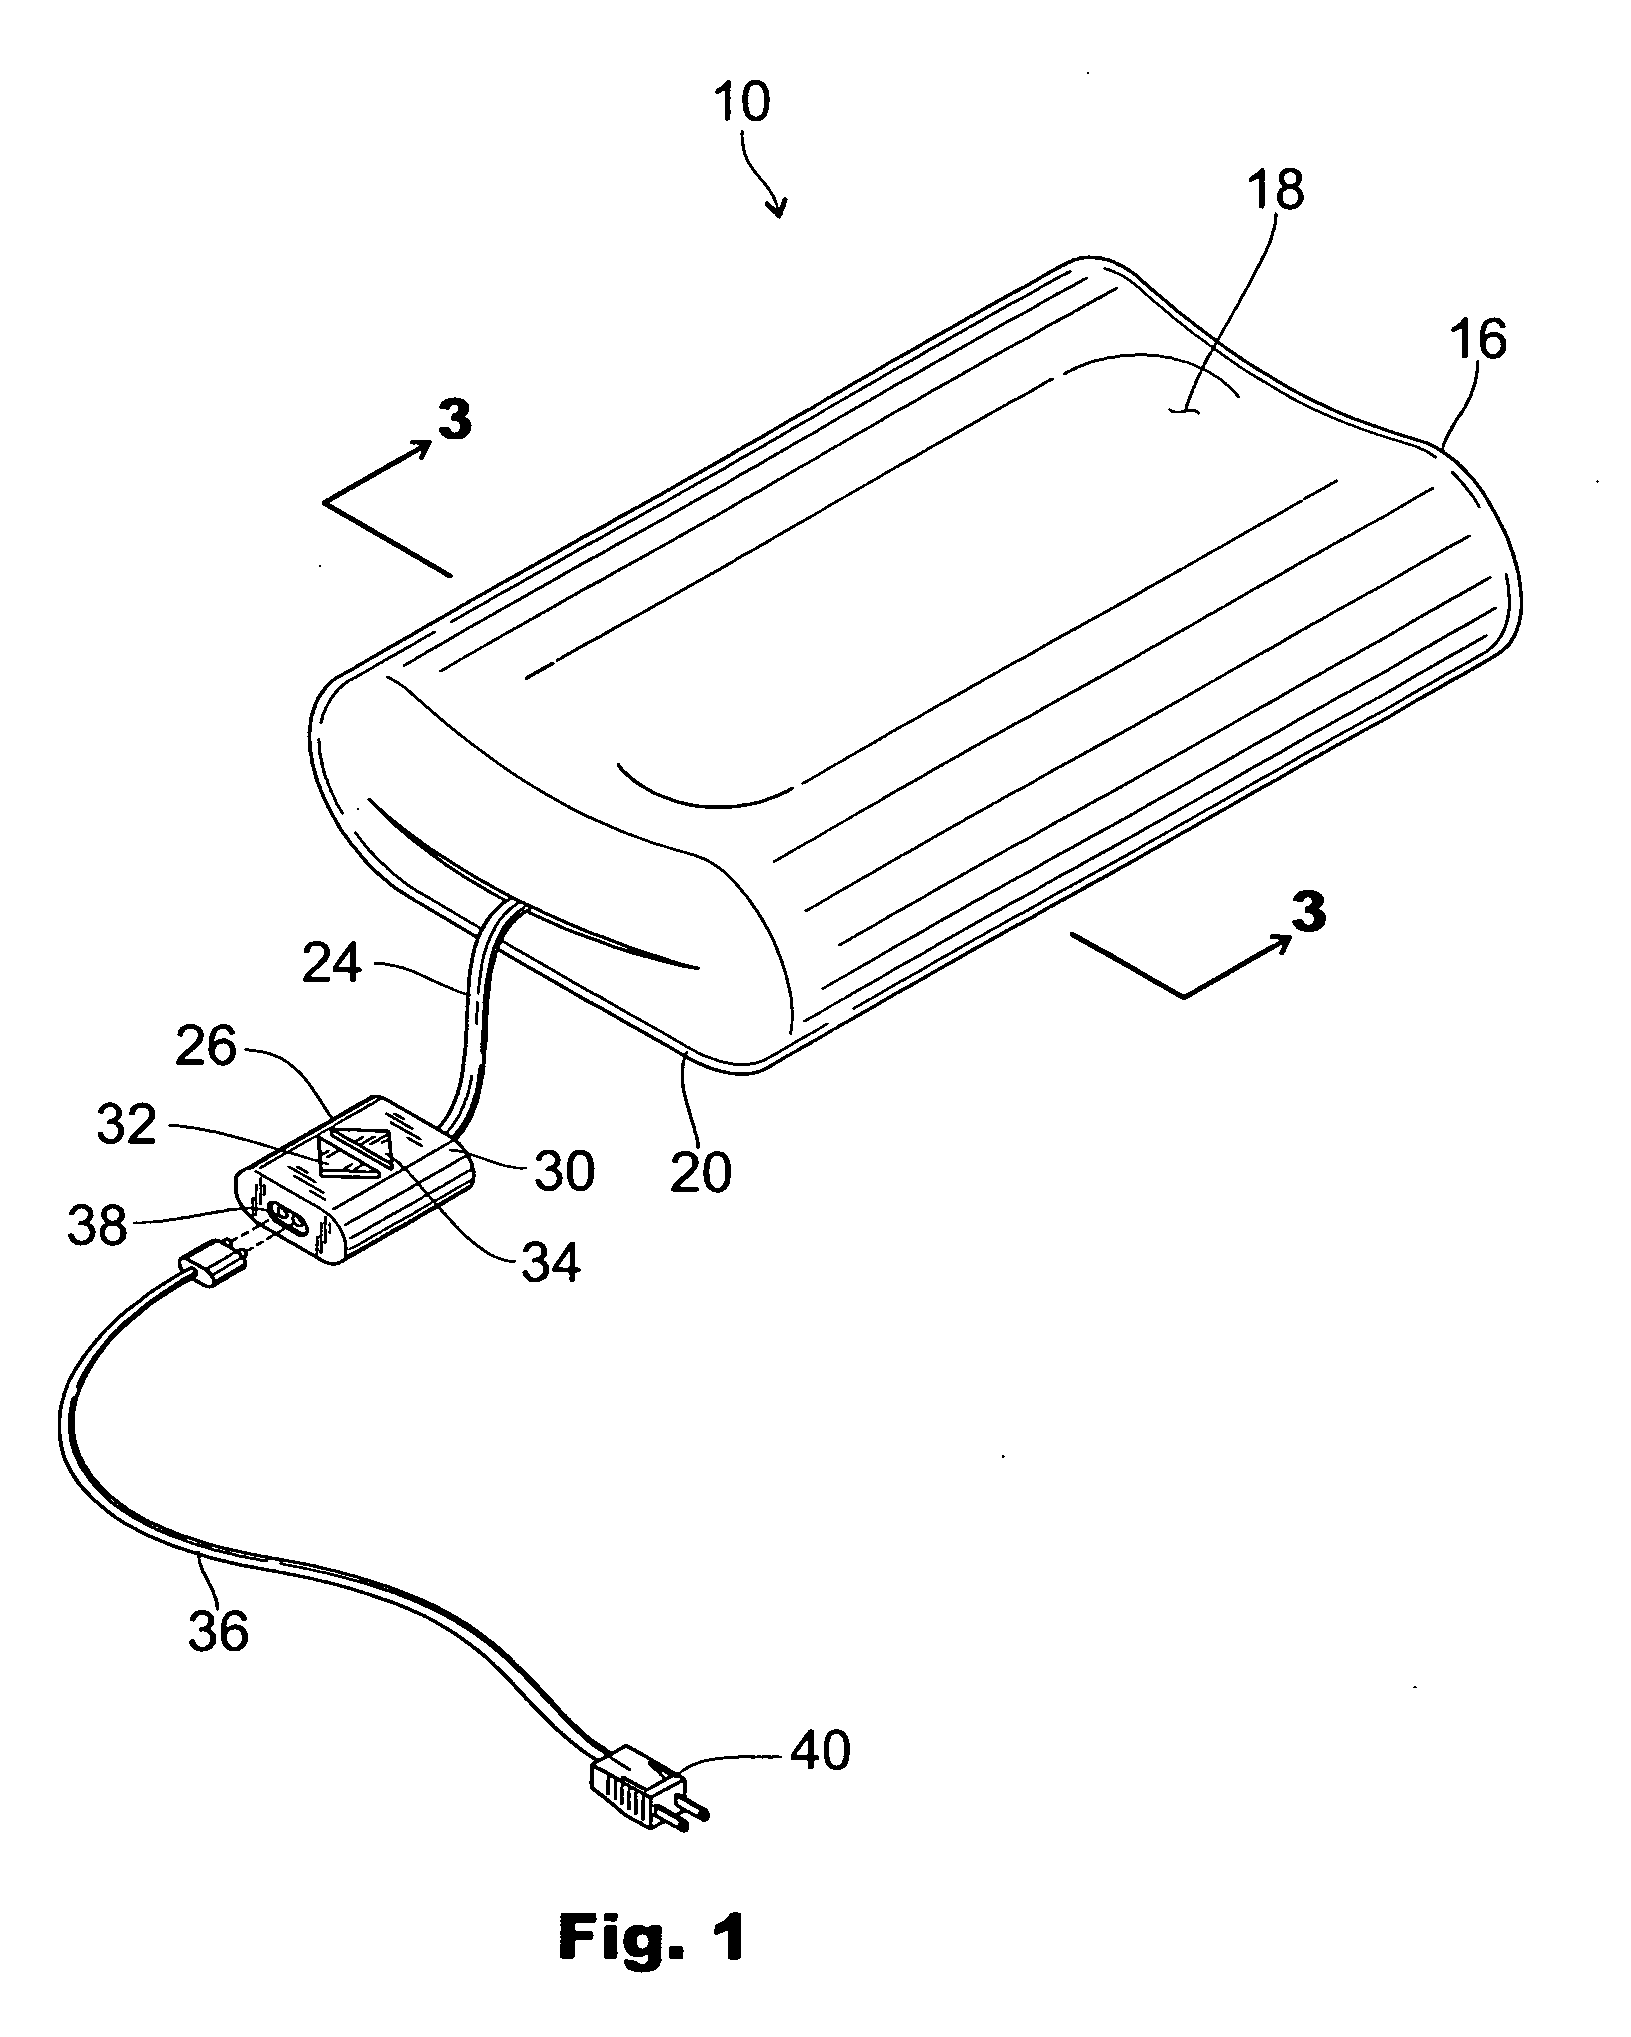 Adjustable pillow for the proper alignment of the head, neck, and spine